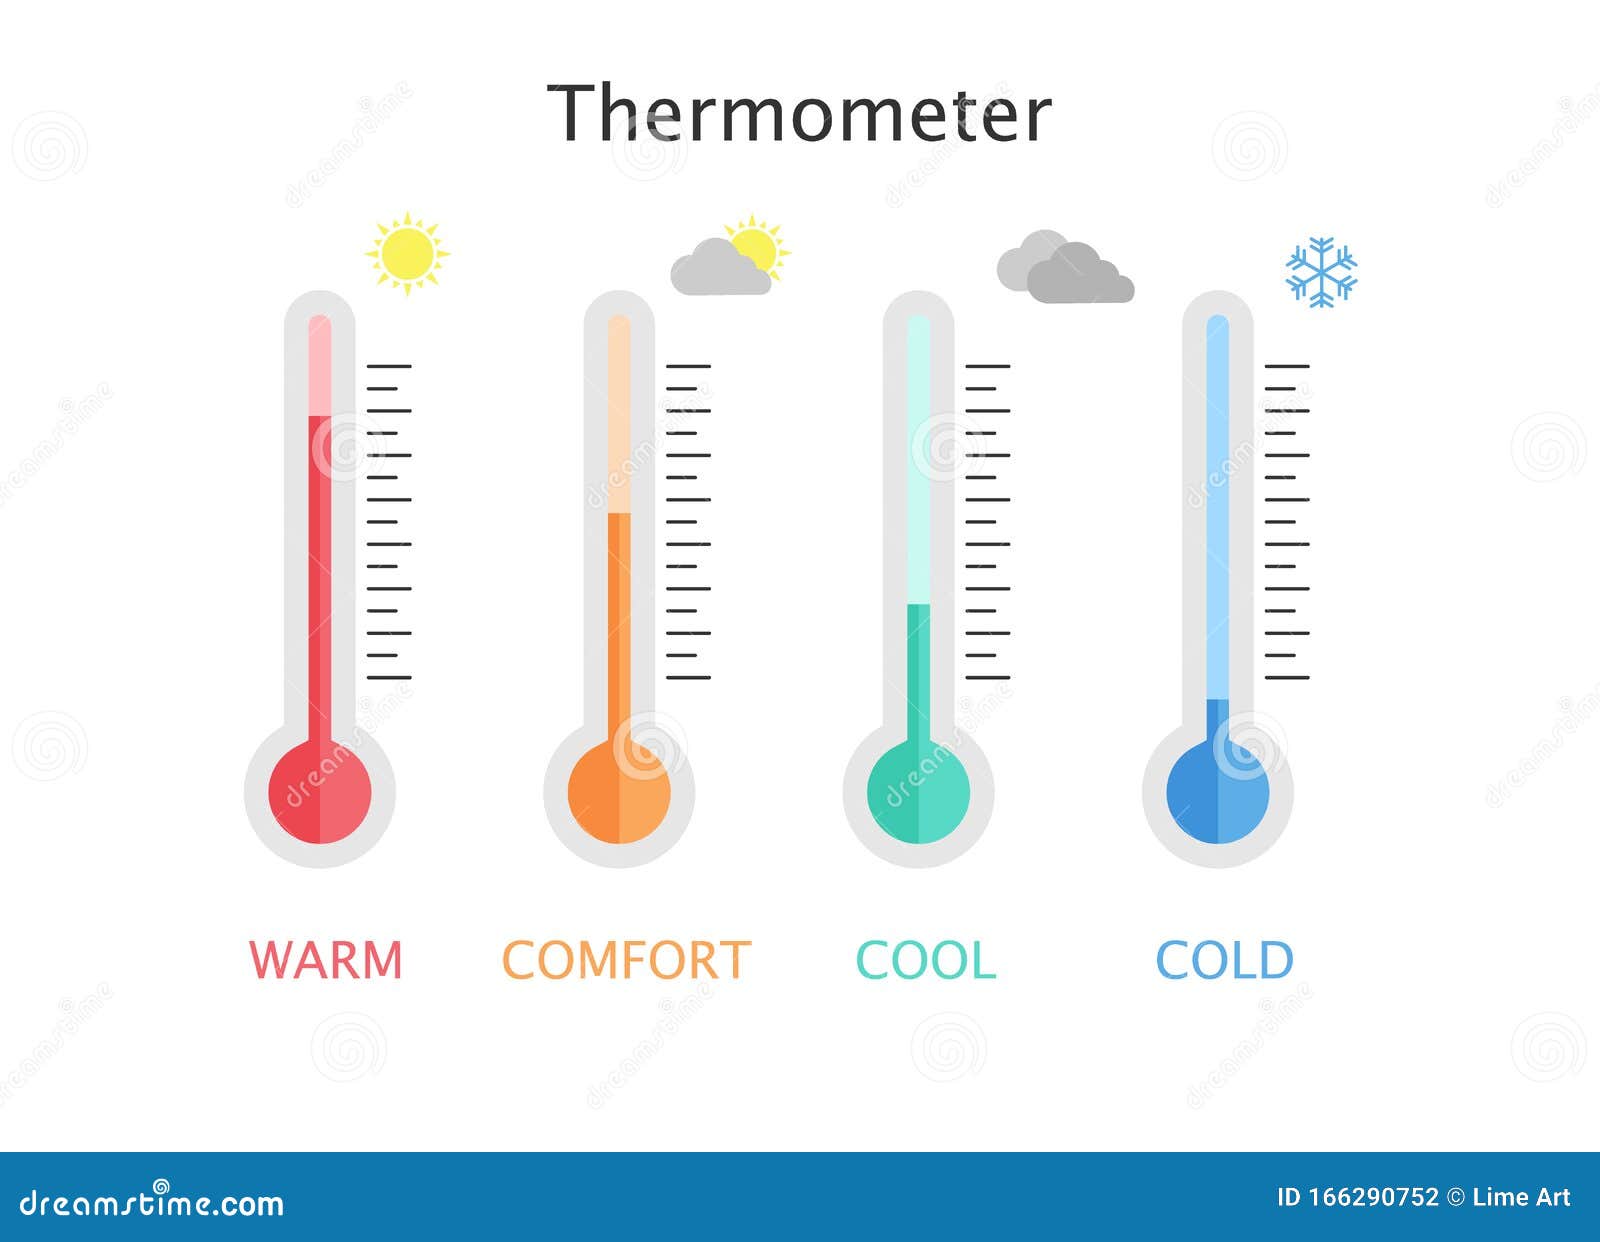 temperature measurement. warm, comfort, cool and cold